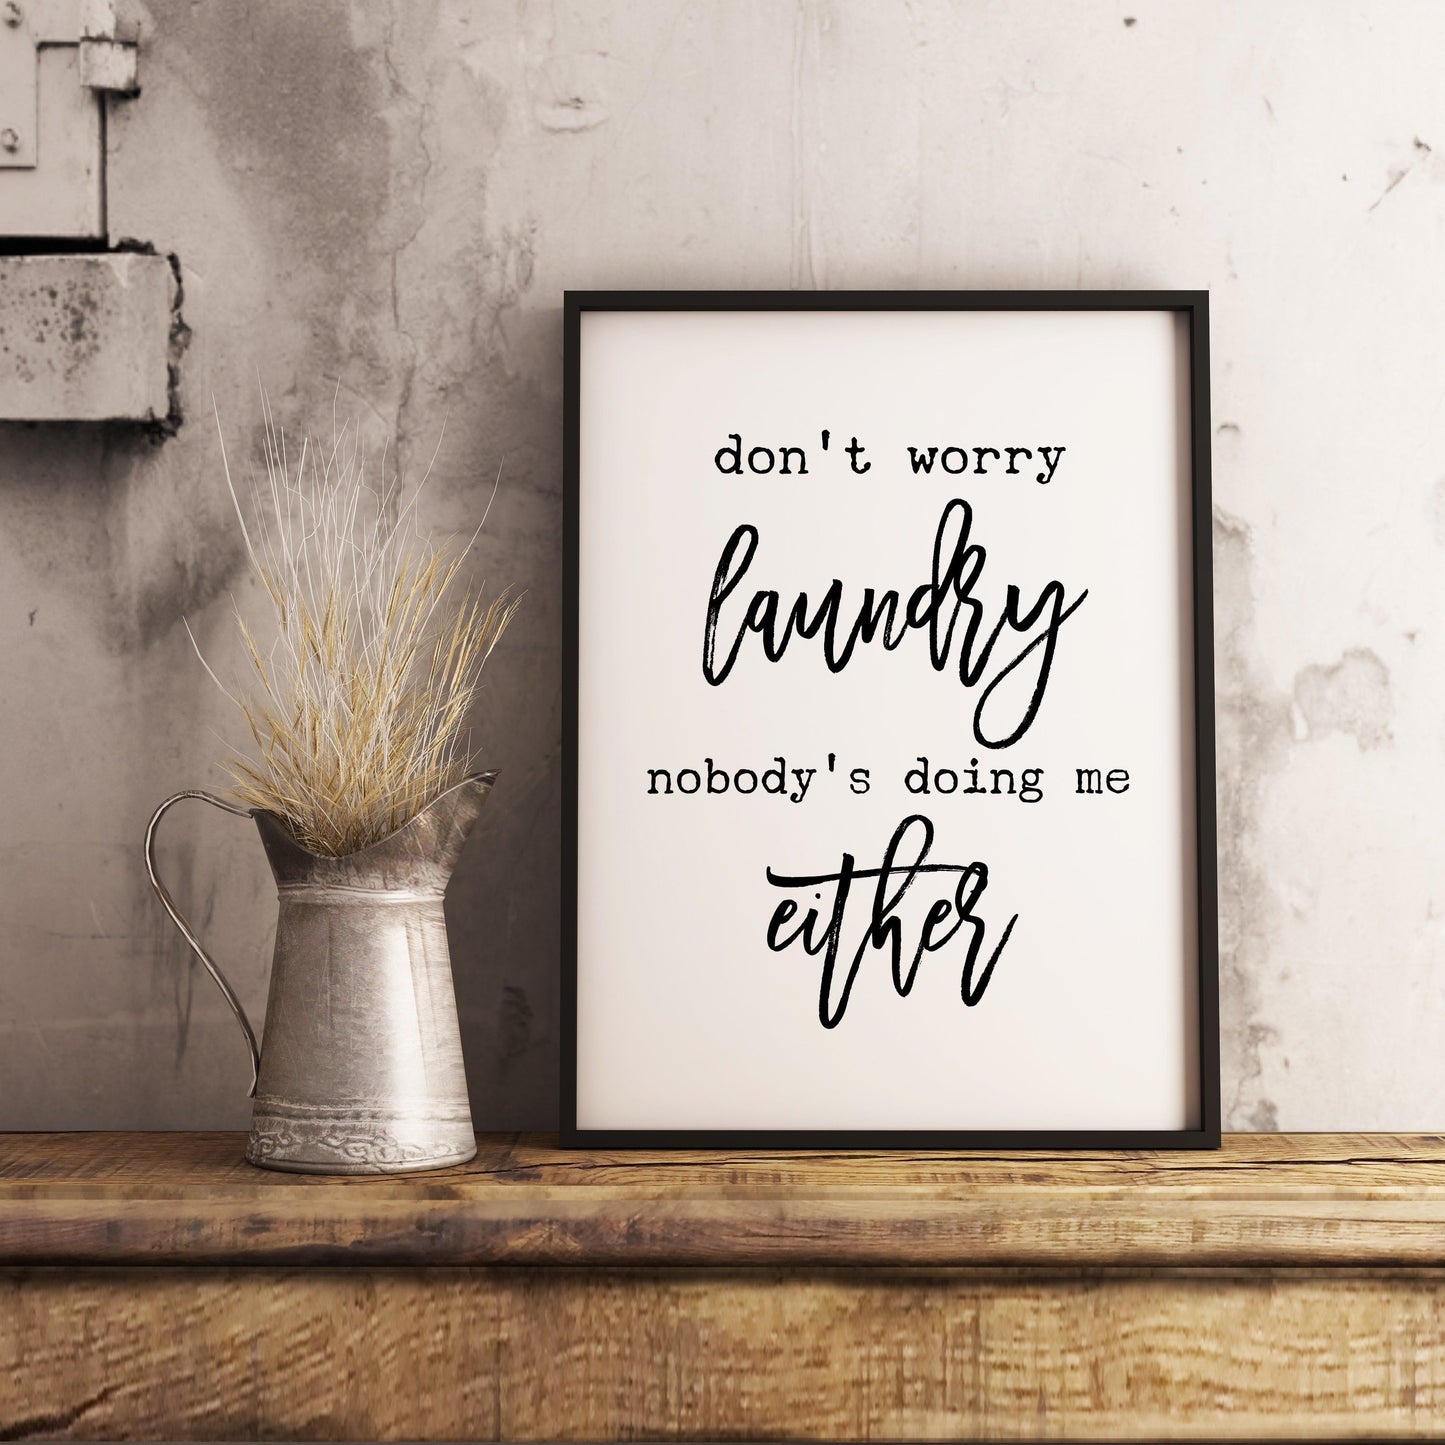 Don't worry laundry nobody is doing me either - Laundry Room humor Farmhouse Wall Art Sign Printable